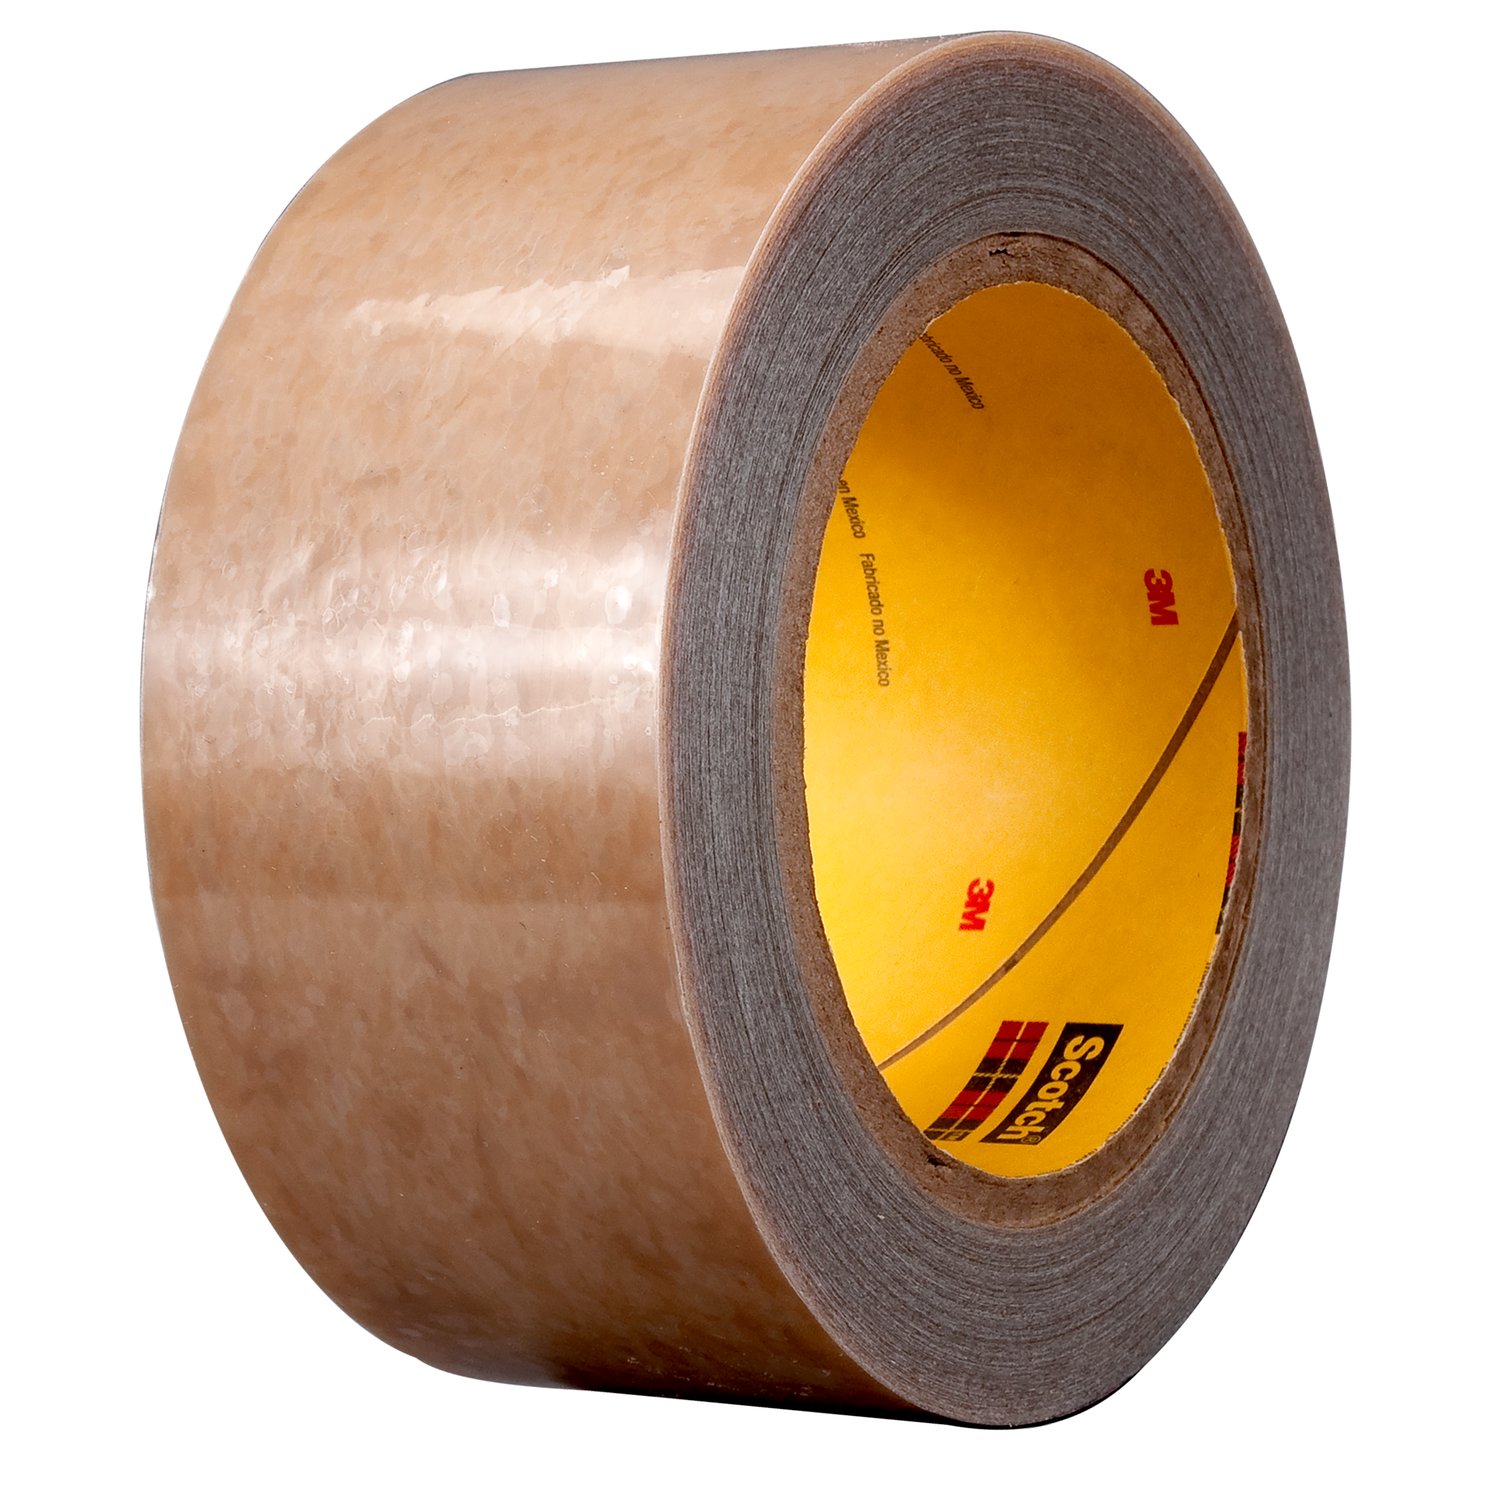 7000144693 - 3M Polyester Protective Tape 336, Transparent, 6 in x 144 yd, 1.5 mil,
2 rolls per case